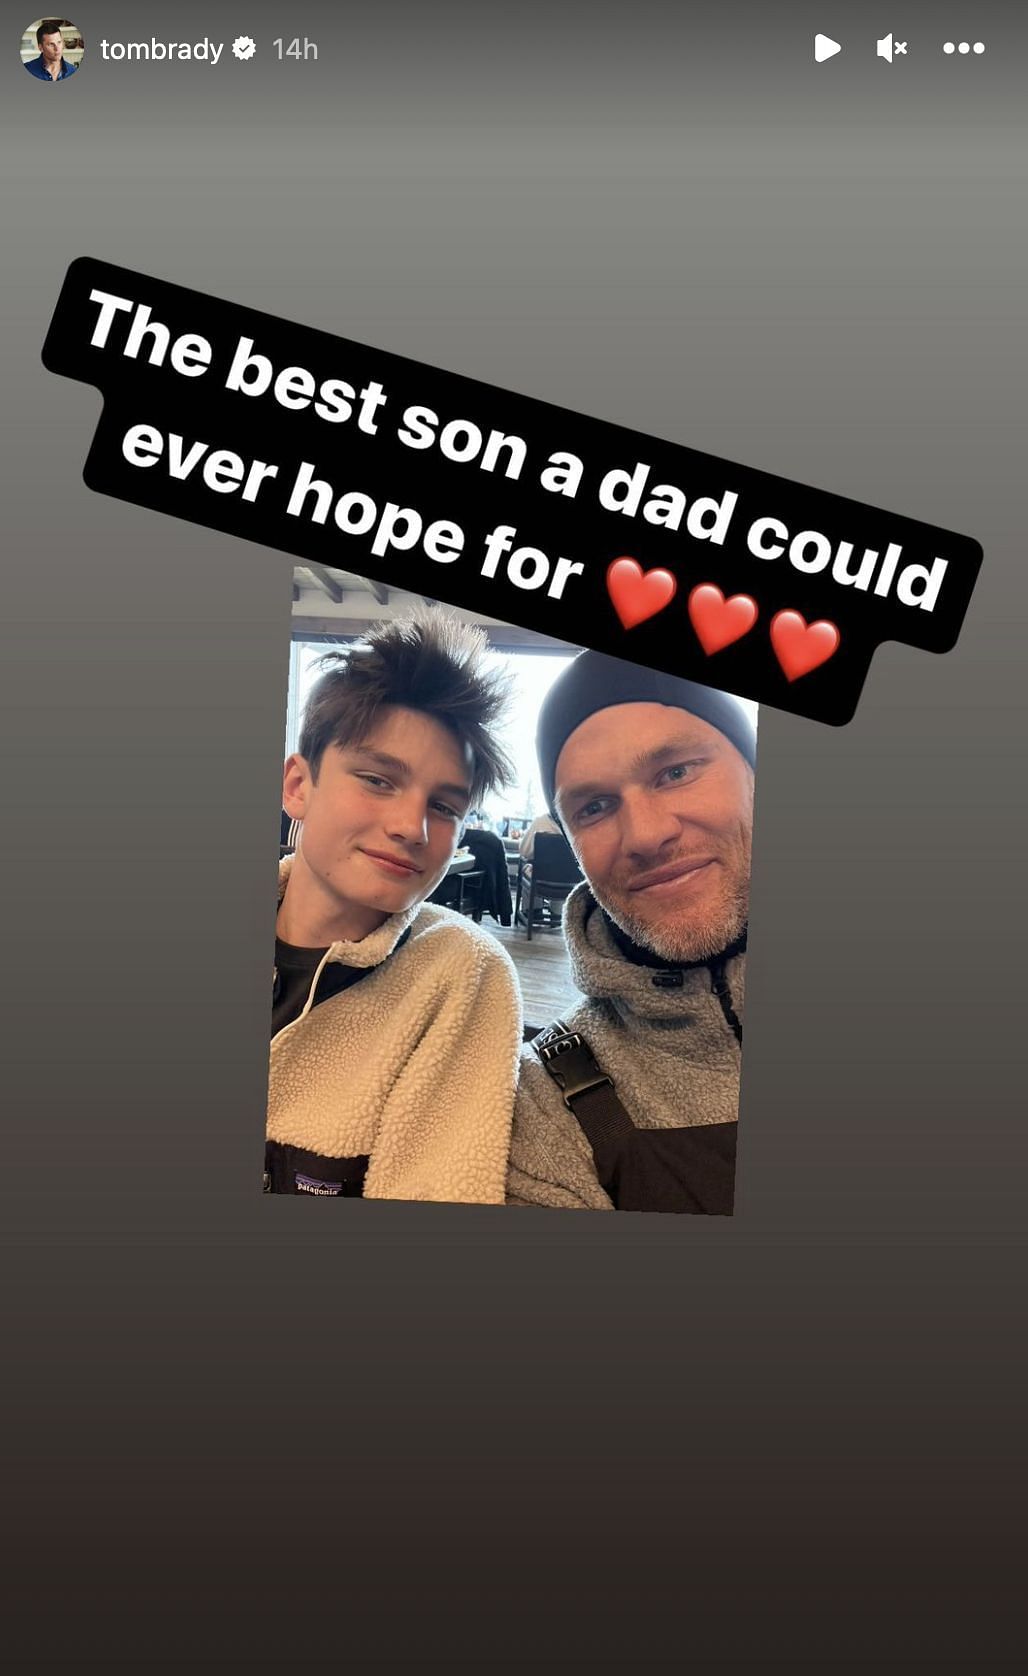 The former NFL QB with his oldest son Jack. Source: Brady (IG)